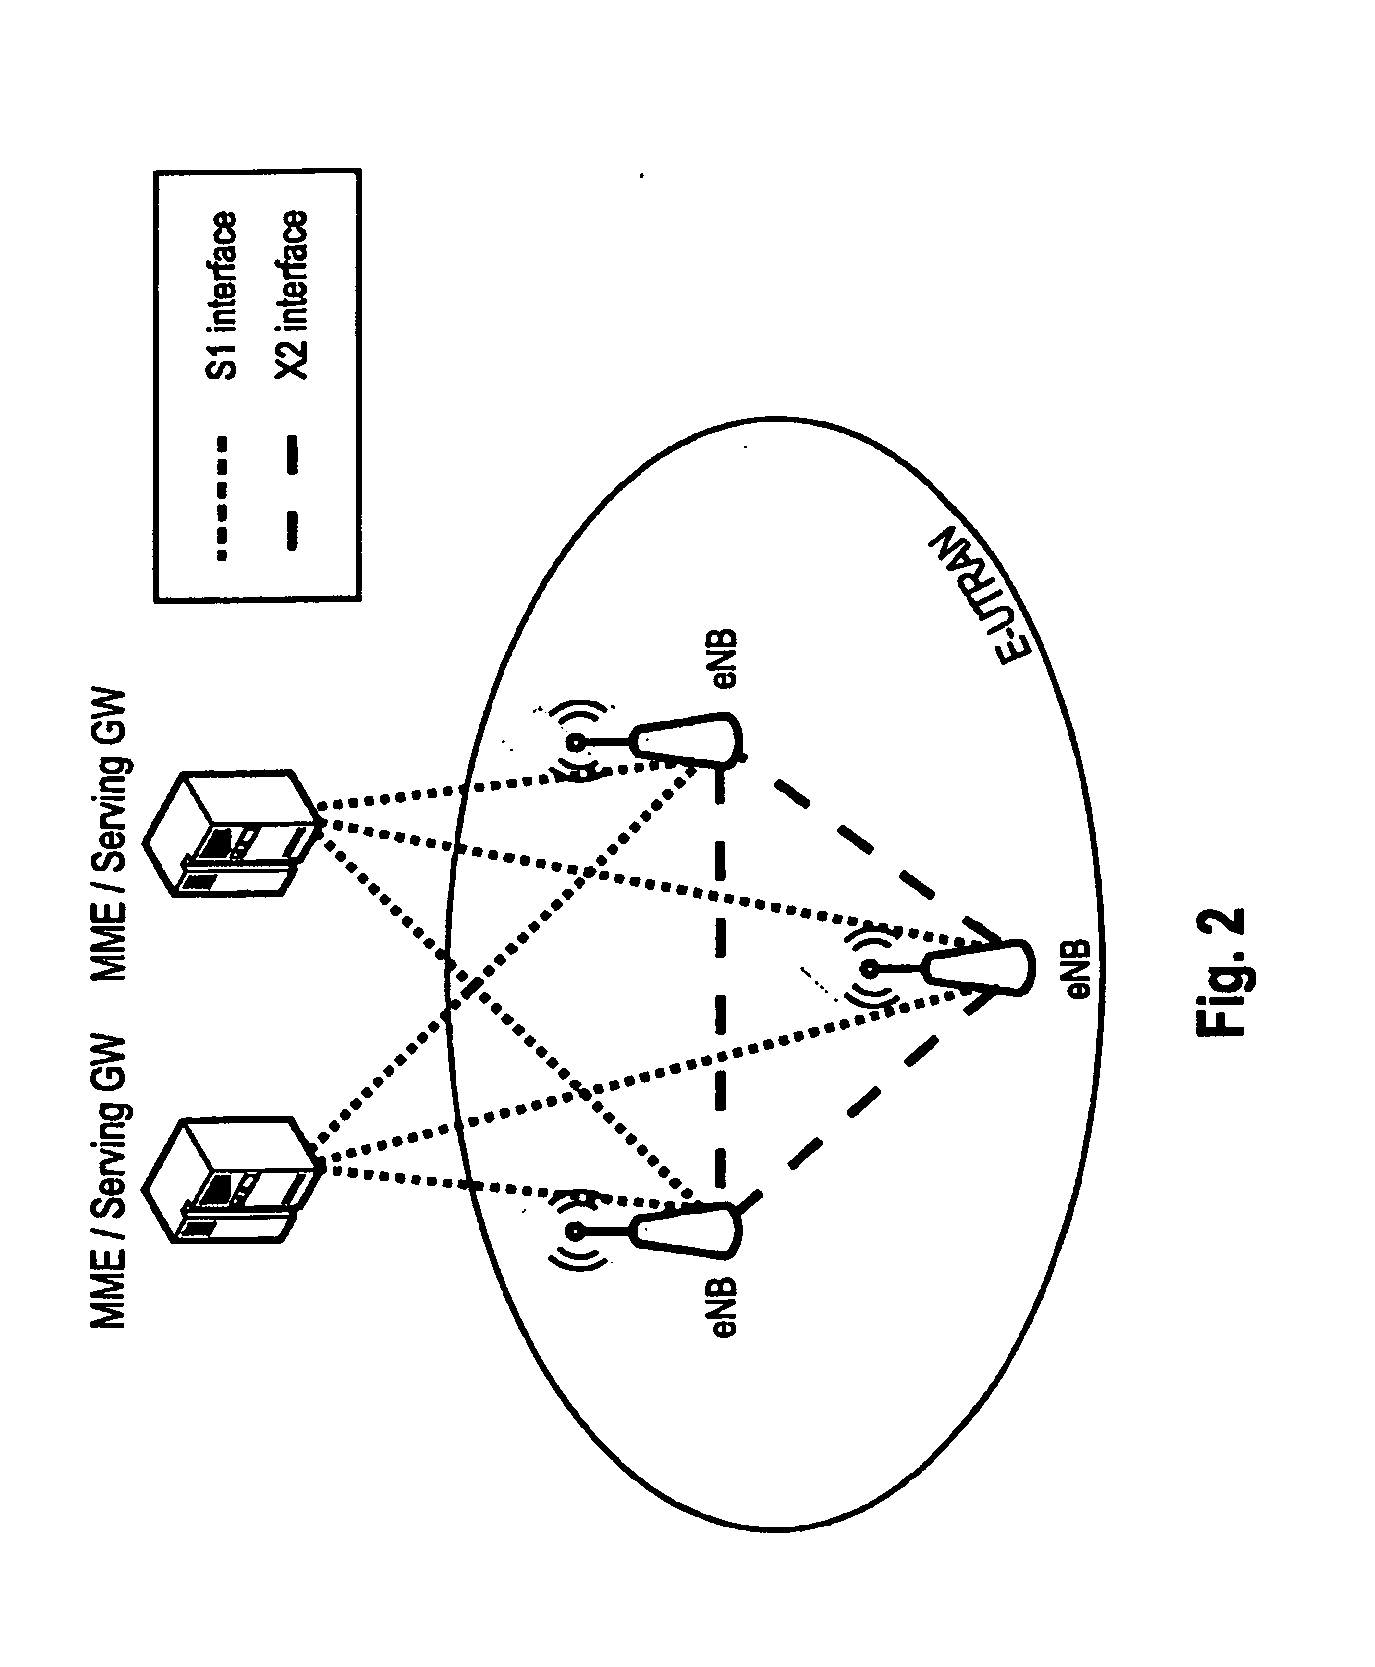 Component carrier (DE)activation in communication systems using carrier aggregation